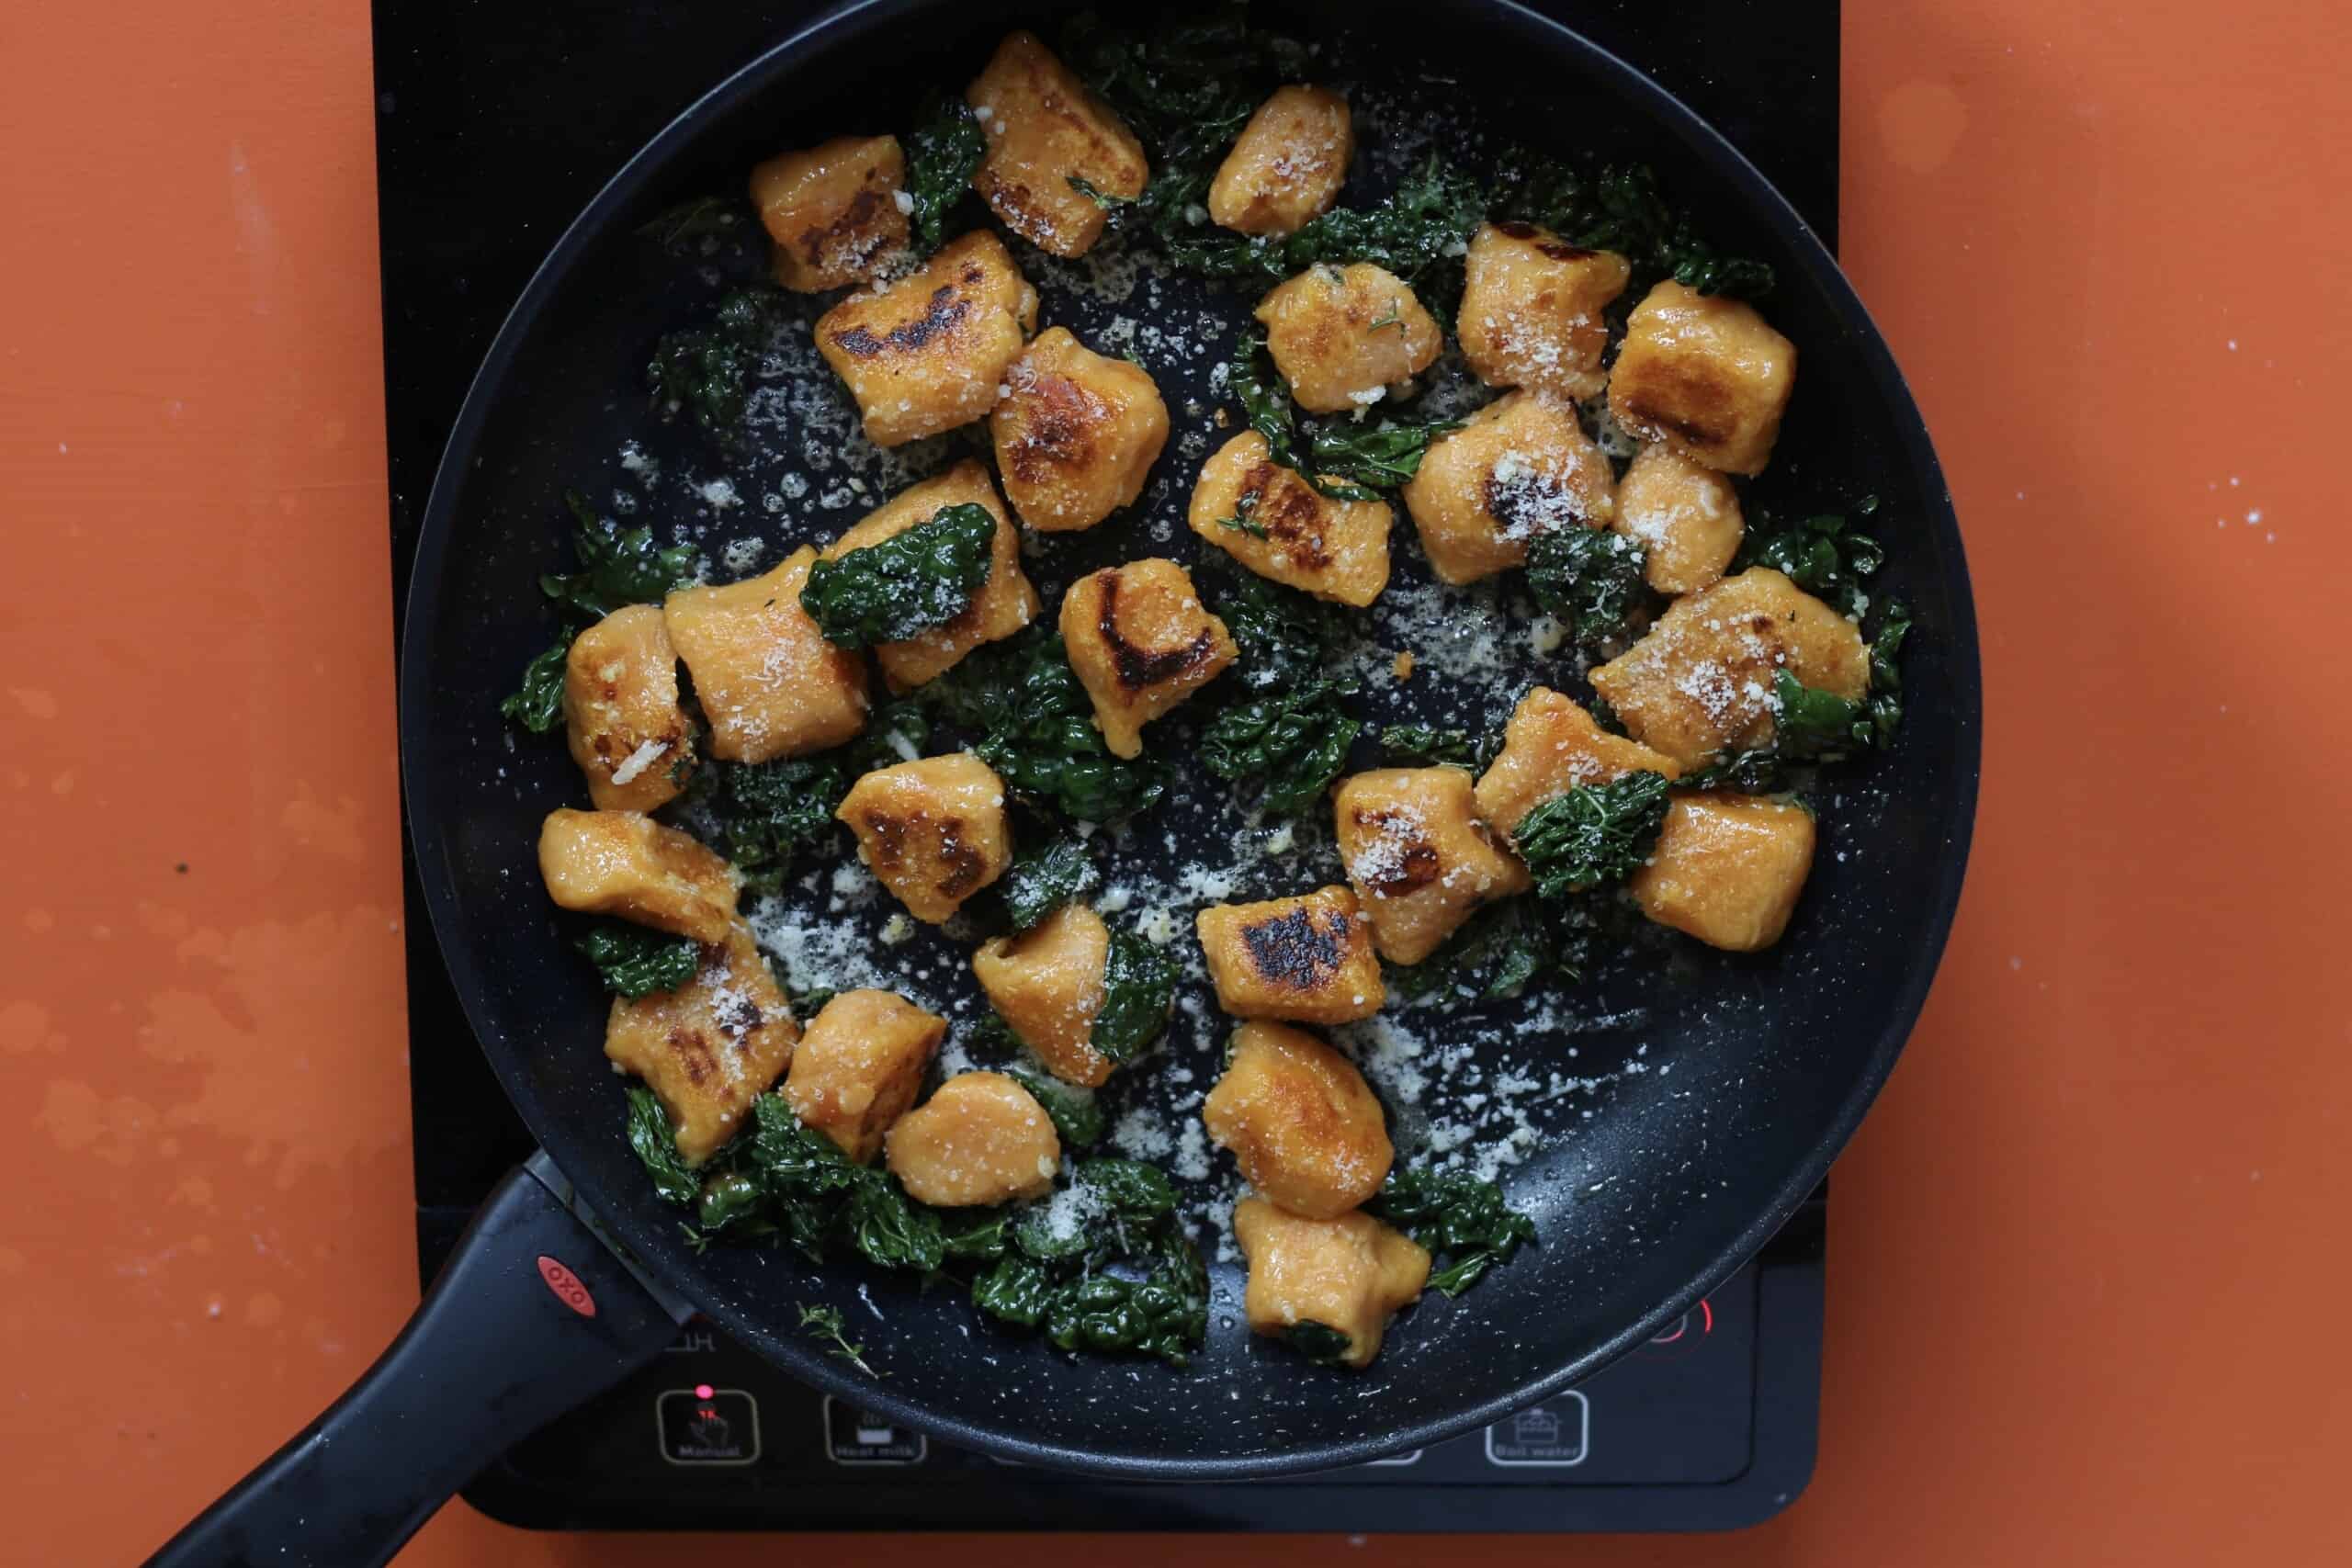 Seet potato gnocchi with cavolo nero browning in a frying pan on a stove on an orange background.